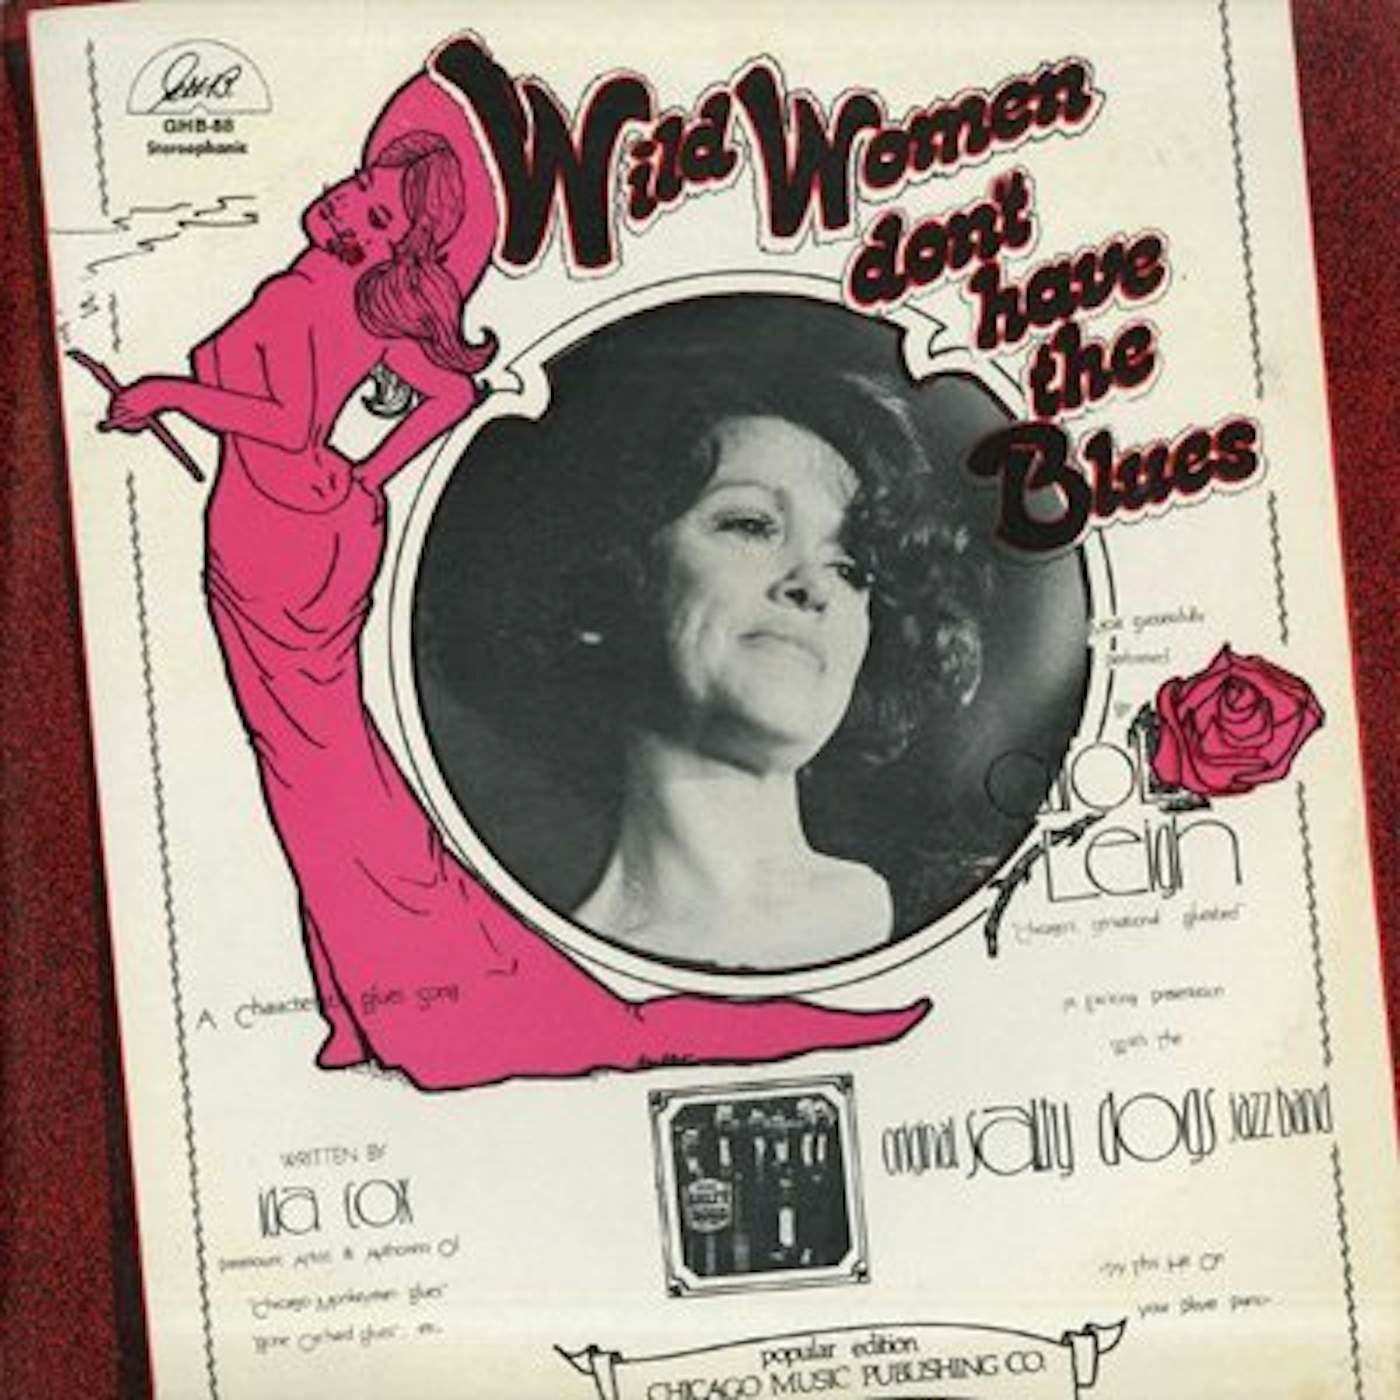 Carol Leigh WILD WOMEN DON'T HAVE THE BLUES Vinyl Record